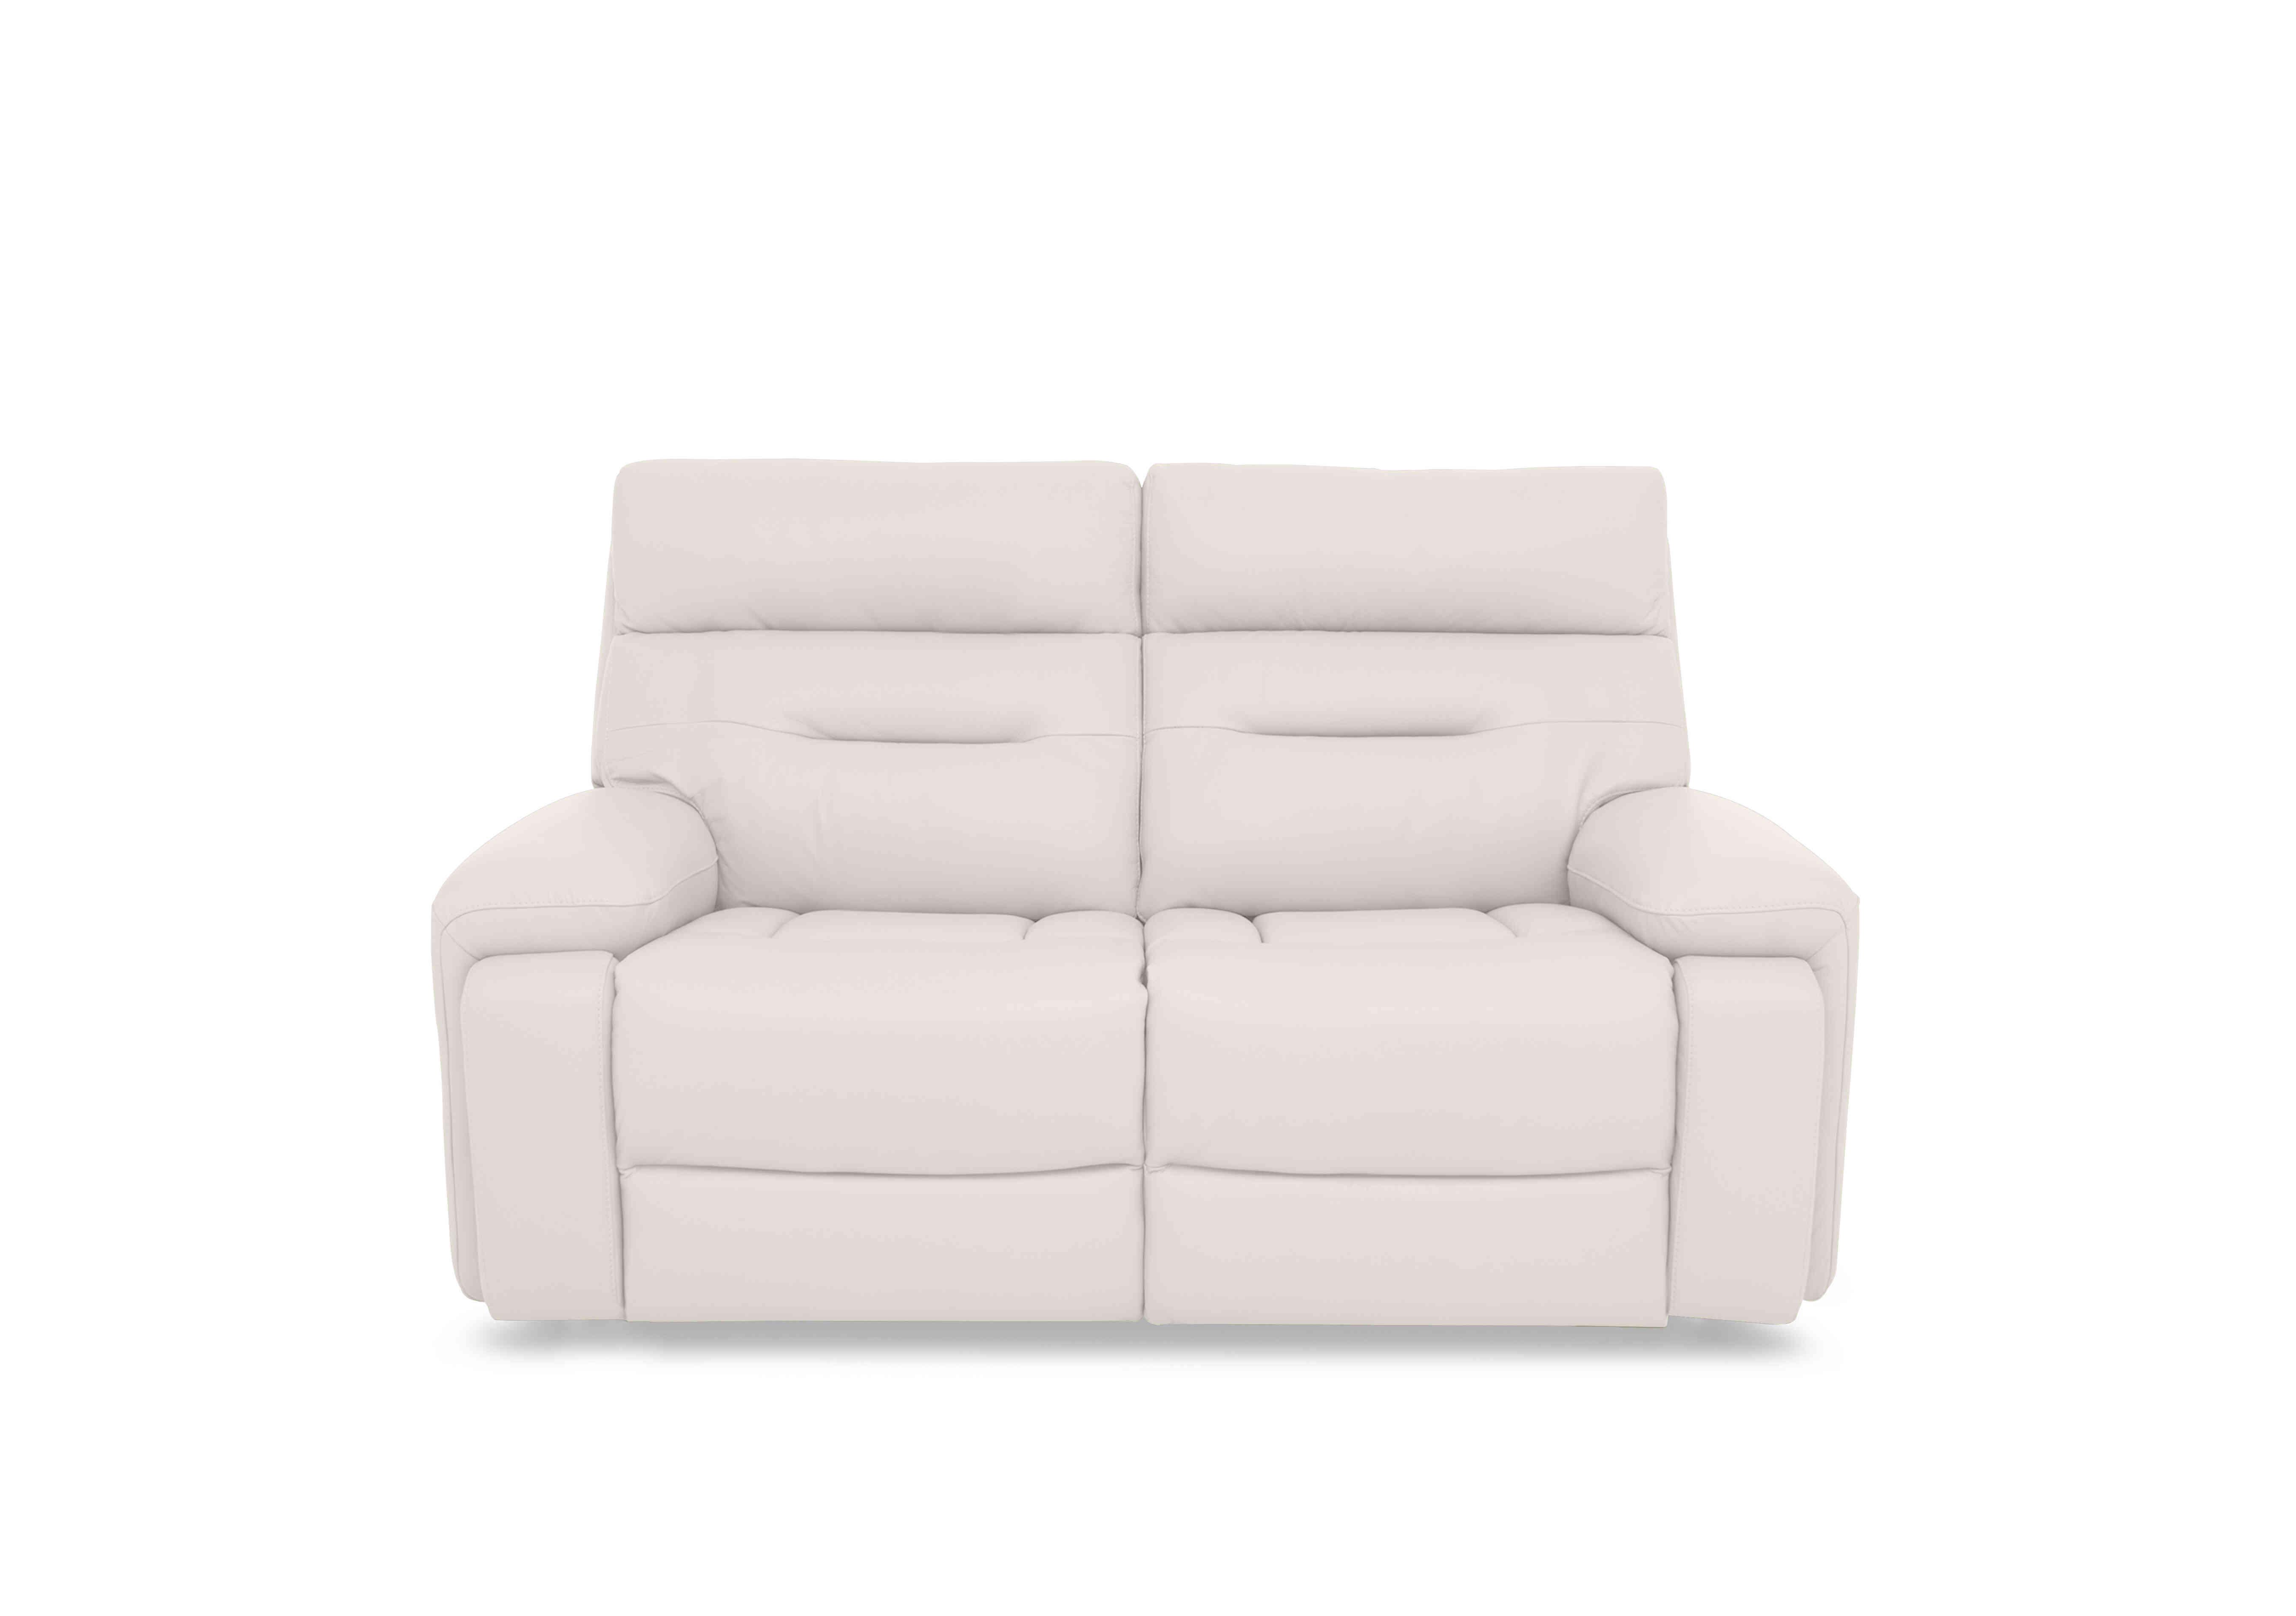 Cinemax 2 Seater Leather Sofa in Le-9307 White on Furniture Village